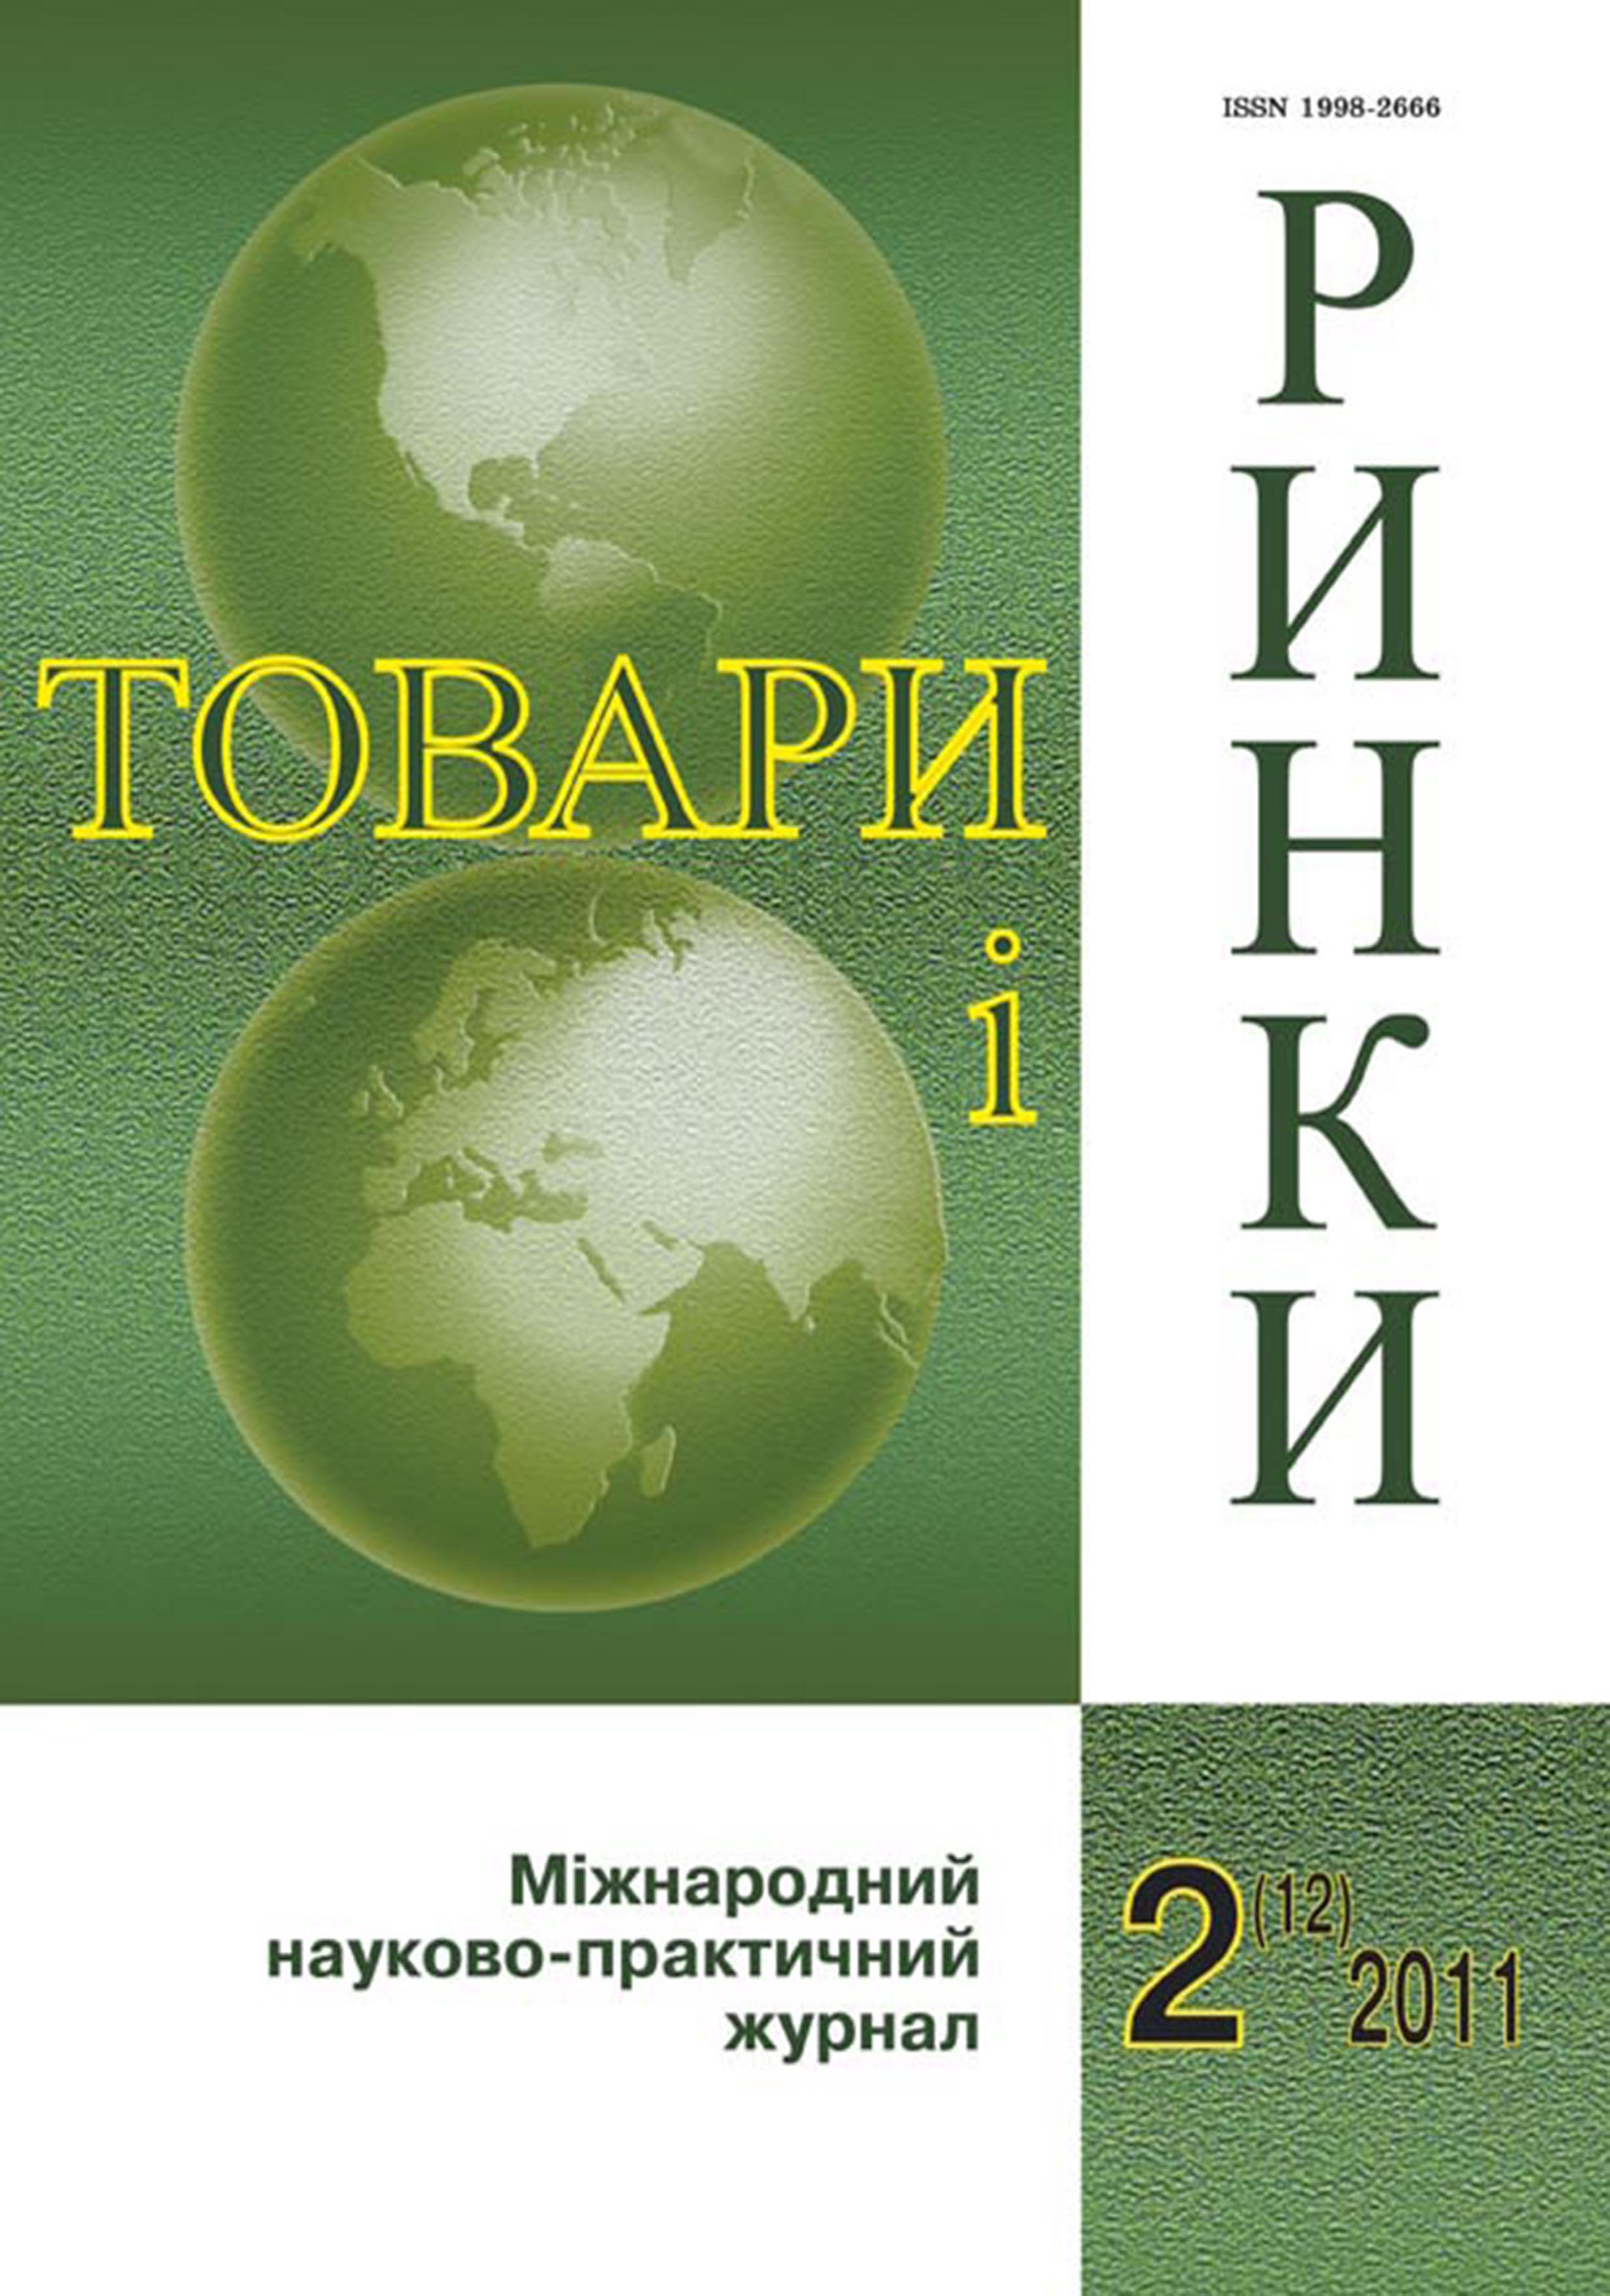 					View Vol. 12 No. 2 (2011): Technical and Economic Science
				